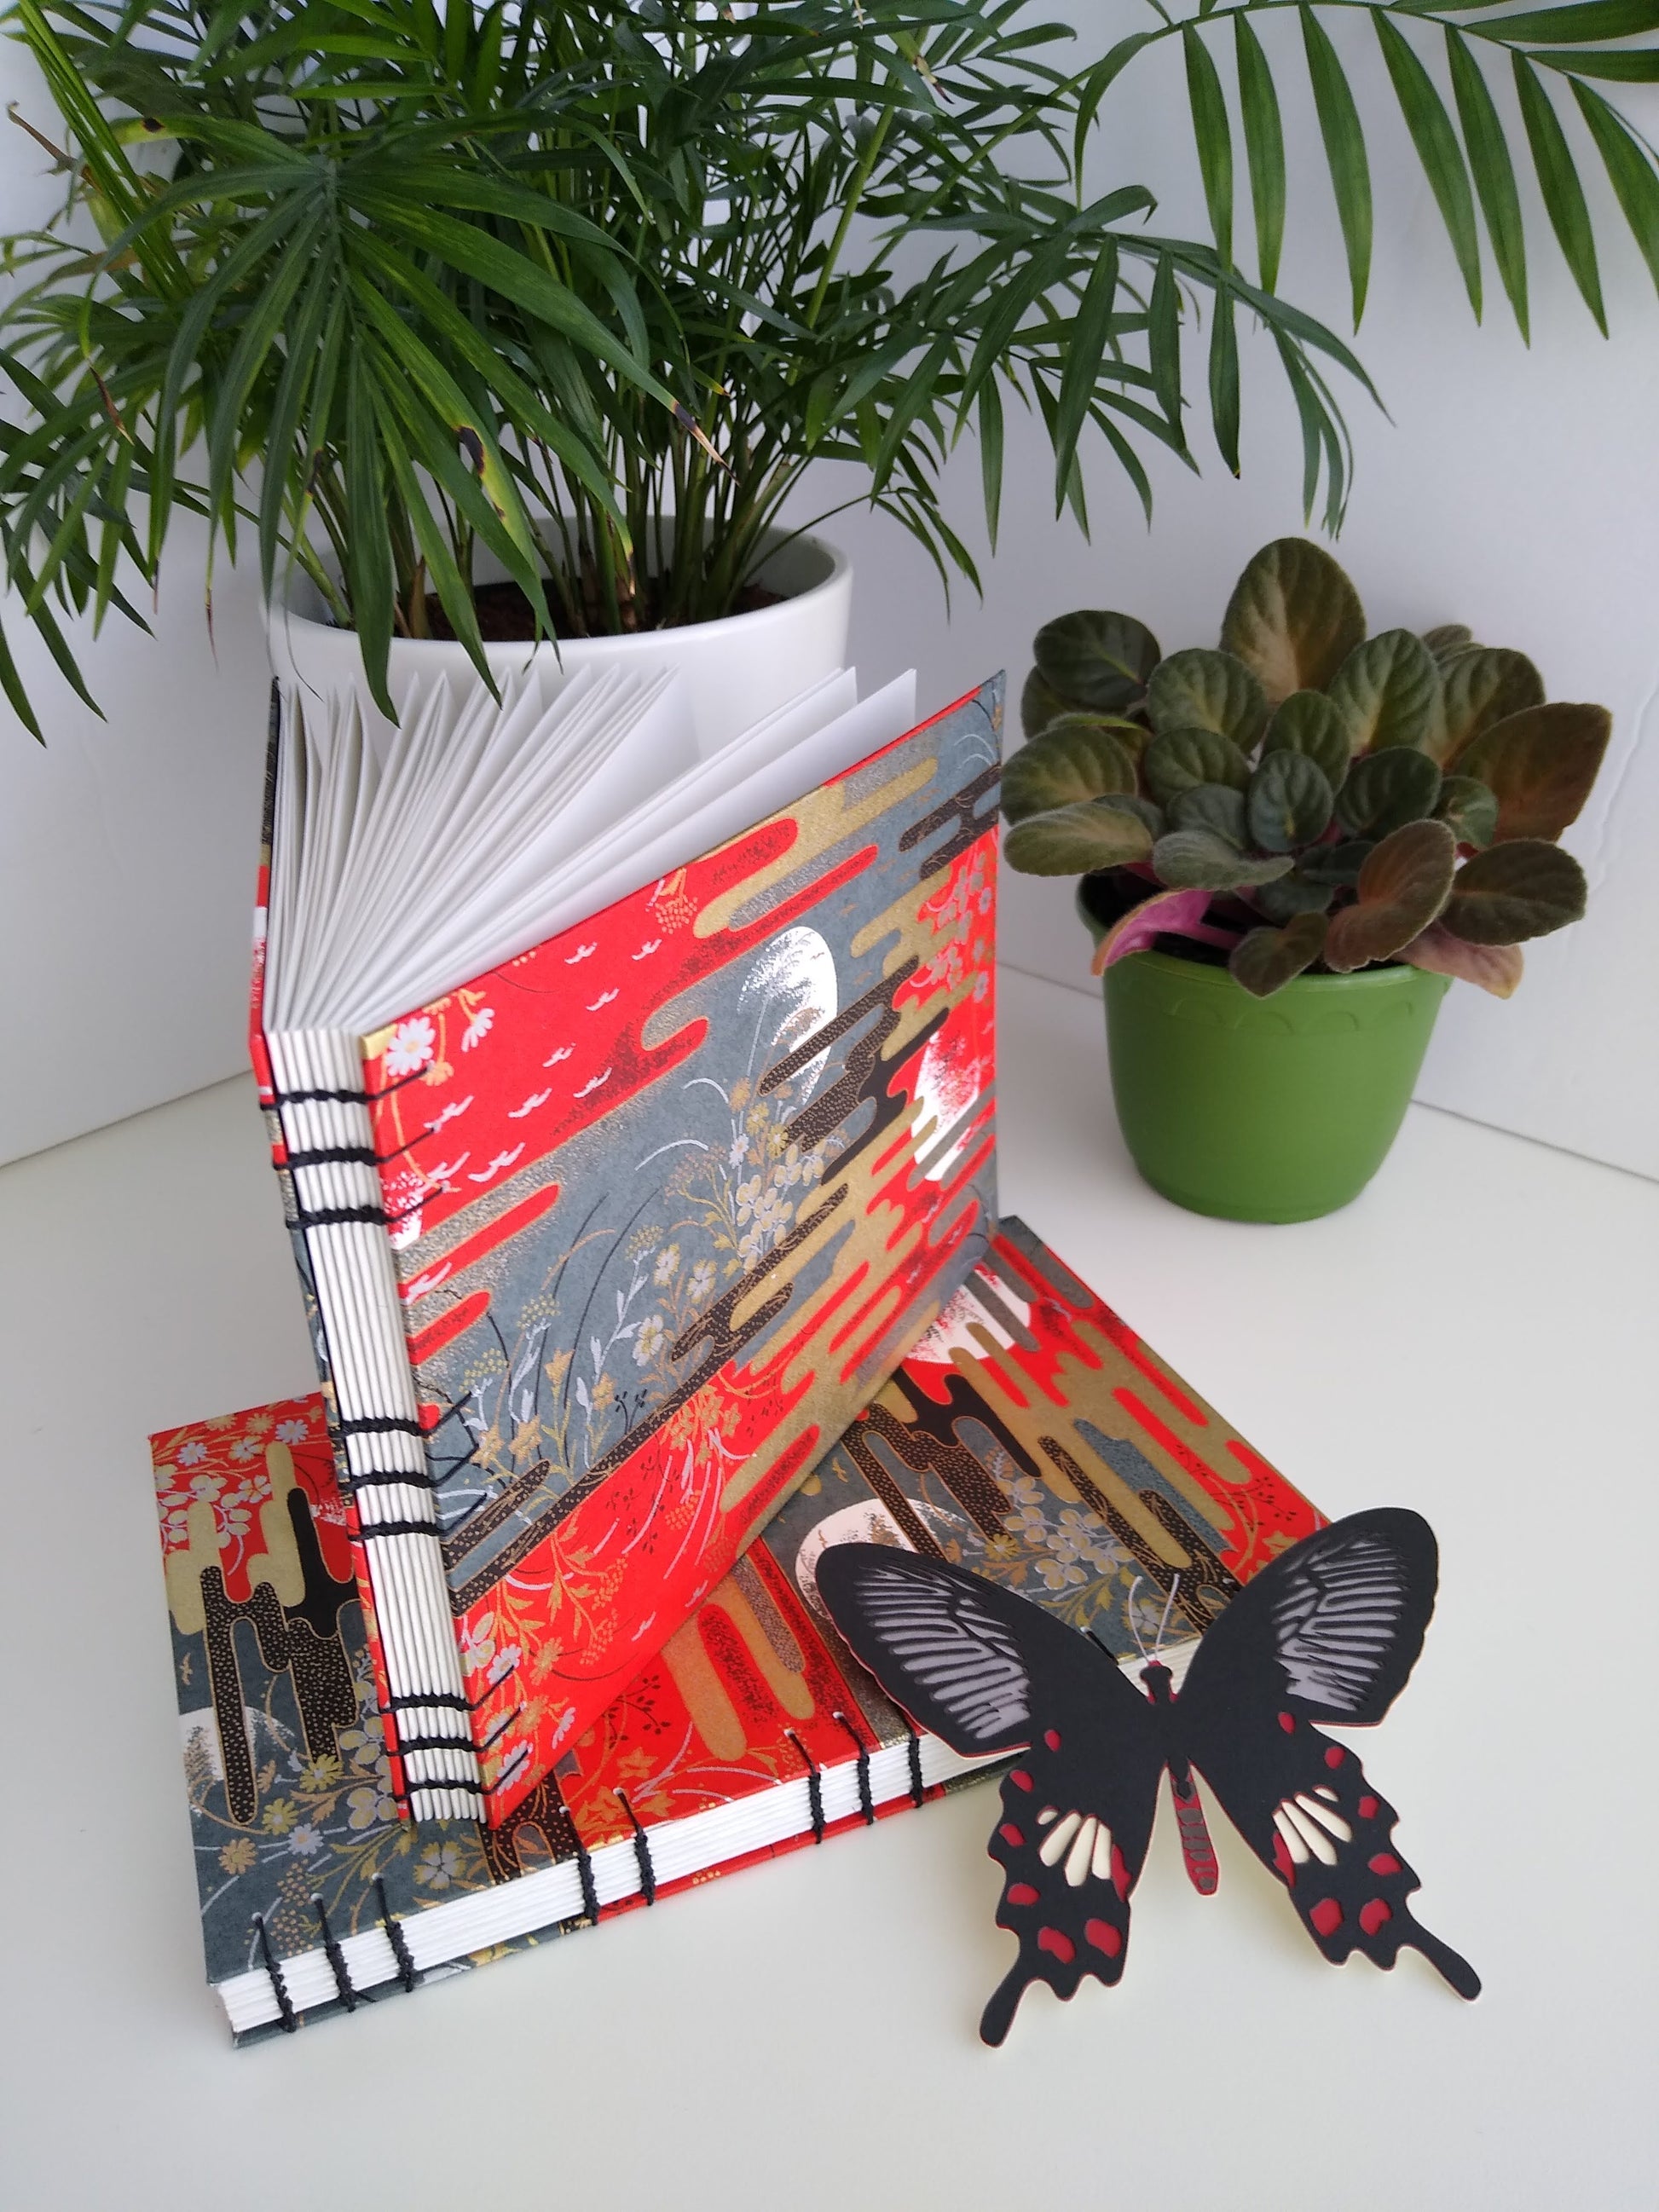 Two handmade journals are positioned beside two potted plants and a paper butterfly. One is laying flat and the other is standing upright on top of it. The cover of the journals are complete scenes with red and grey skies with partial moon outlines, flowers, birds, and gold and black stylized clouds. The journals are angled to show their open spines and black thread stitching them together.